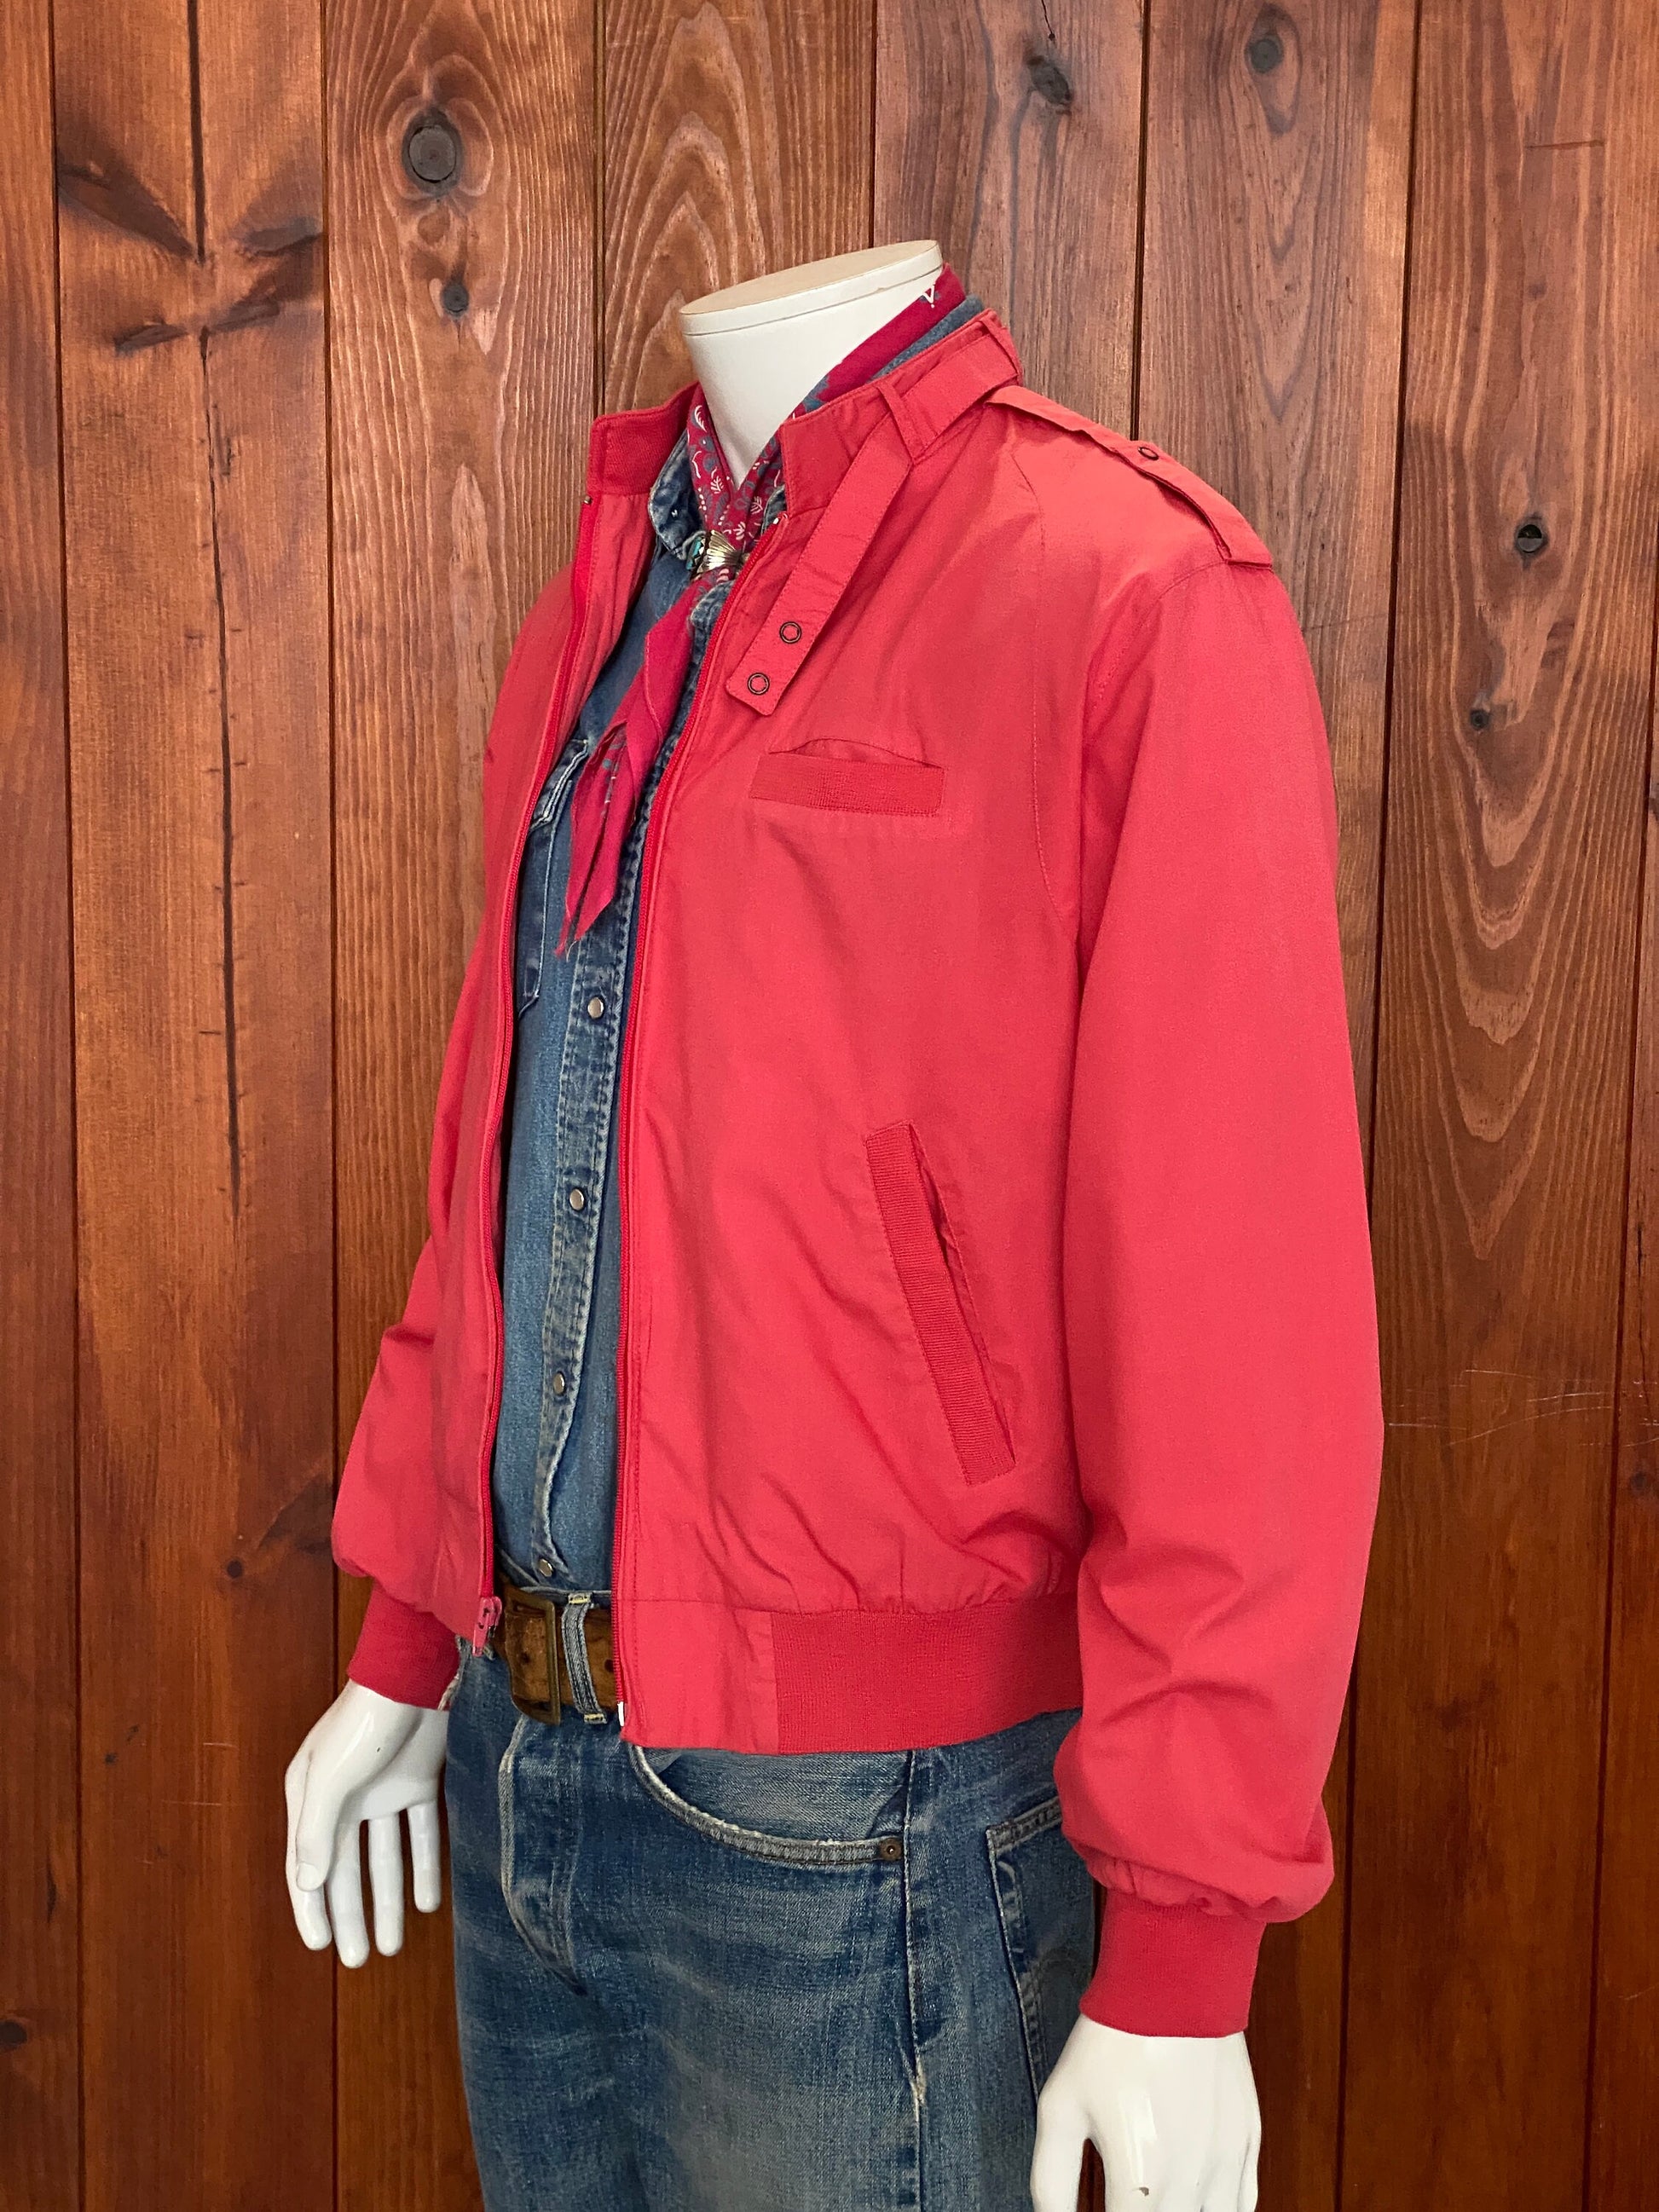 Vintage 80s Members Only style cotton jacket by Peter England, size Medium - Retro fashion with timeless appeal.